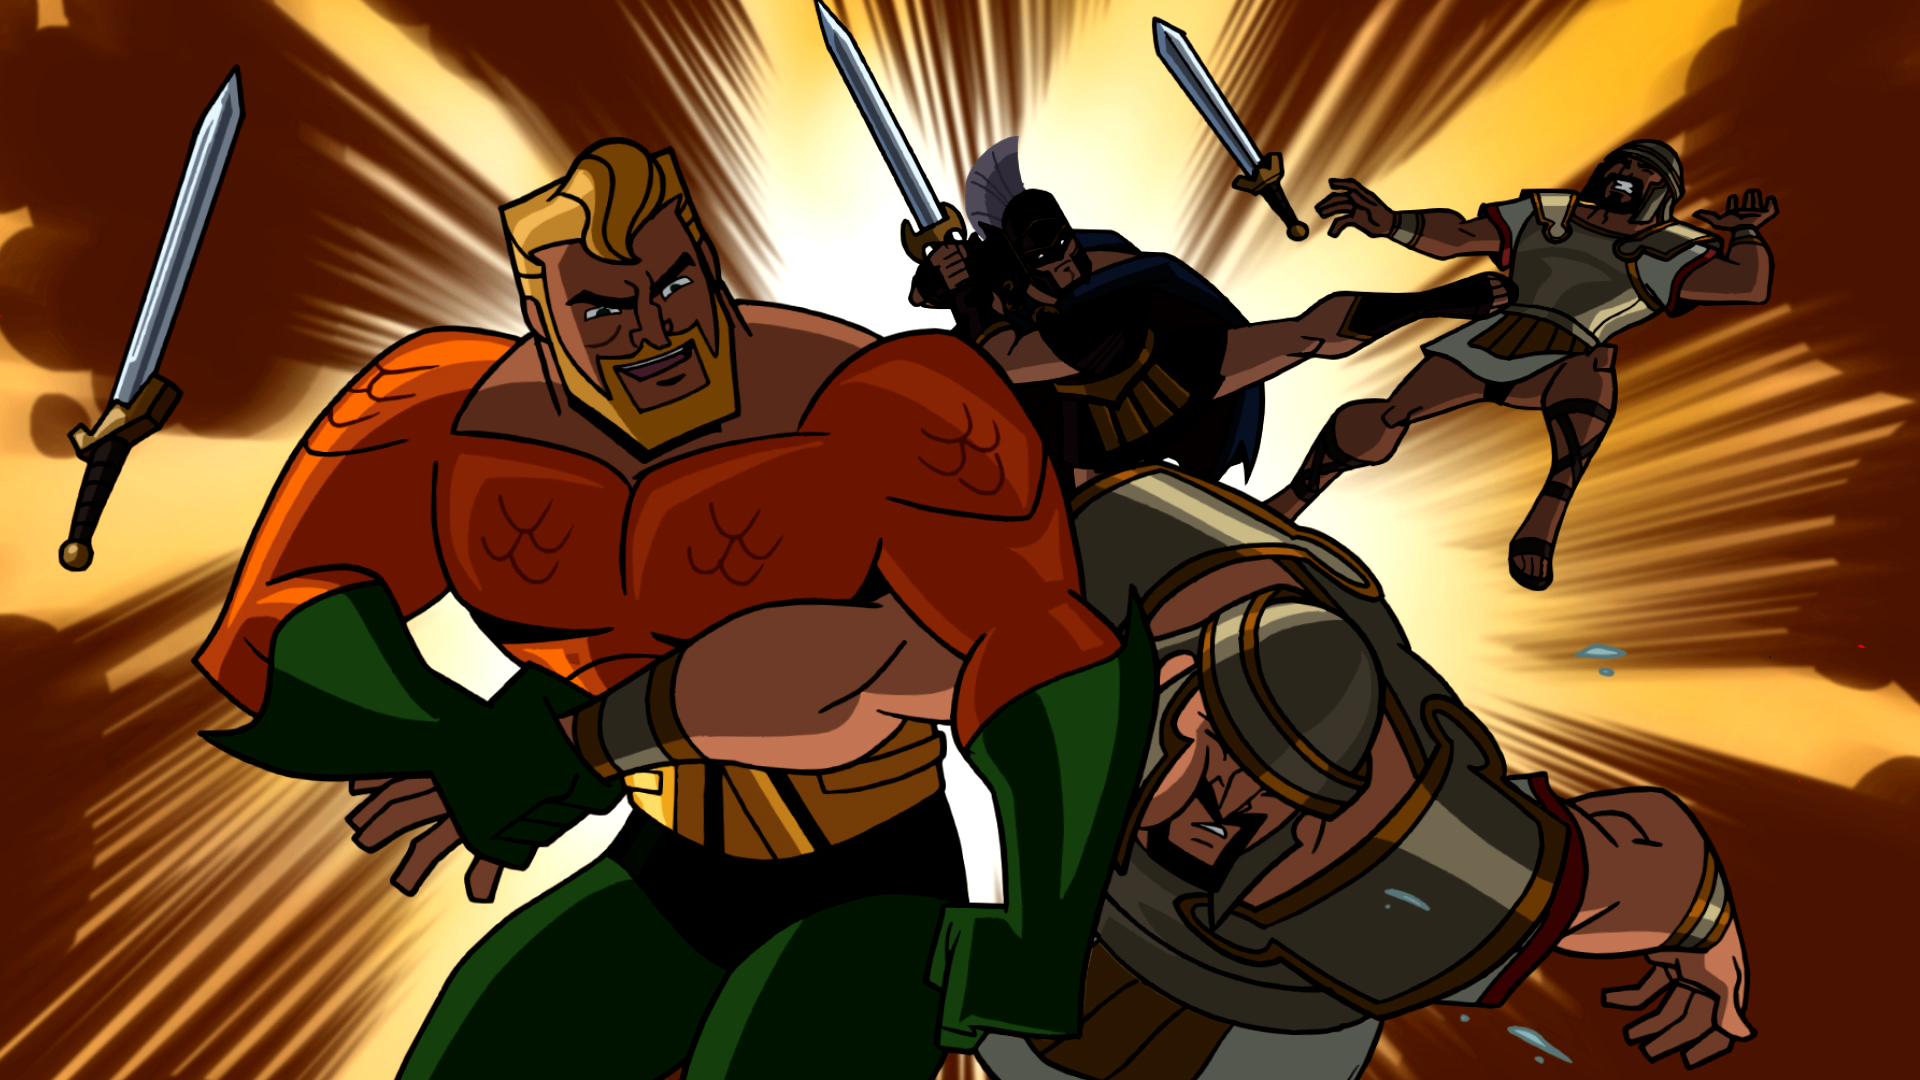 Batman: The Brave and the Bold-Time Out for Vengeance Screenshot